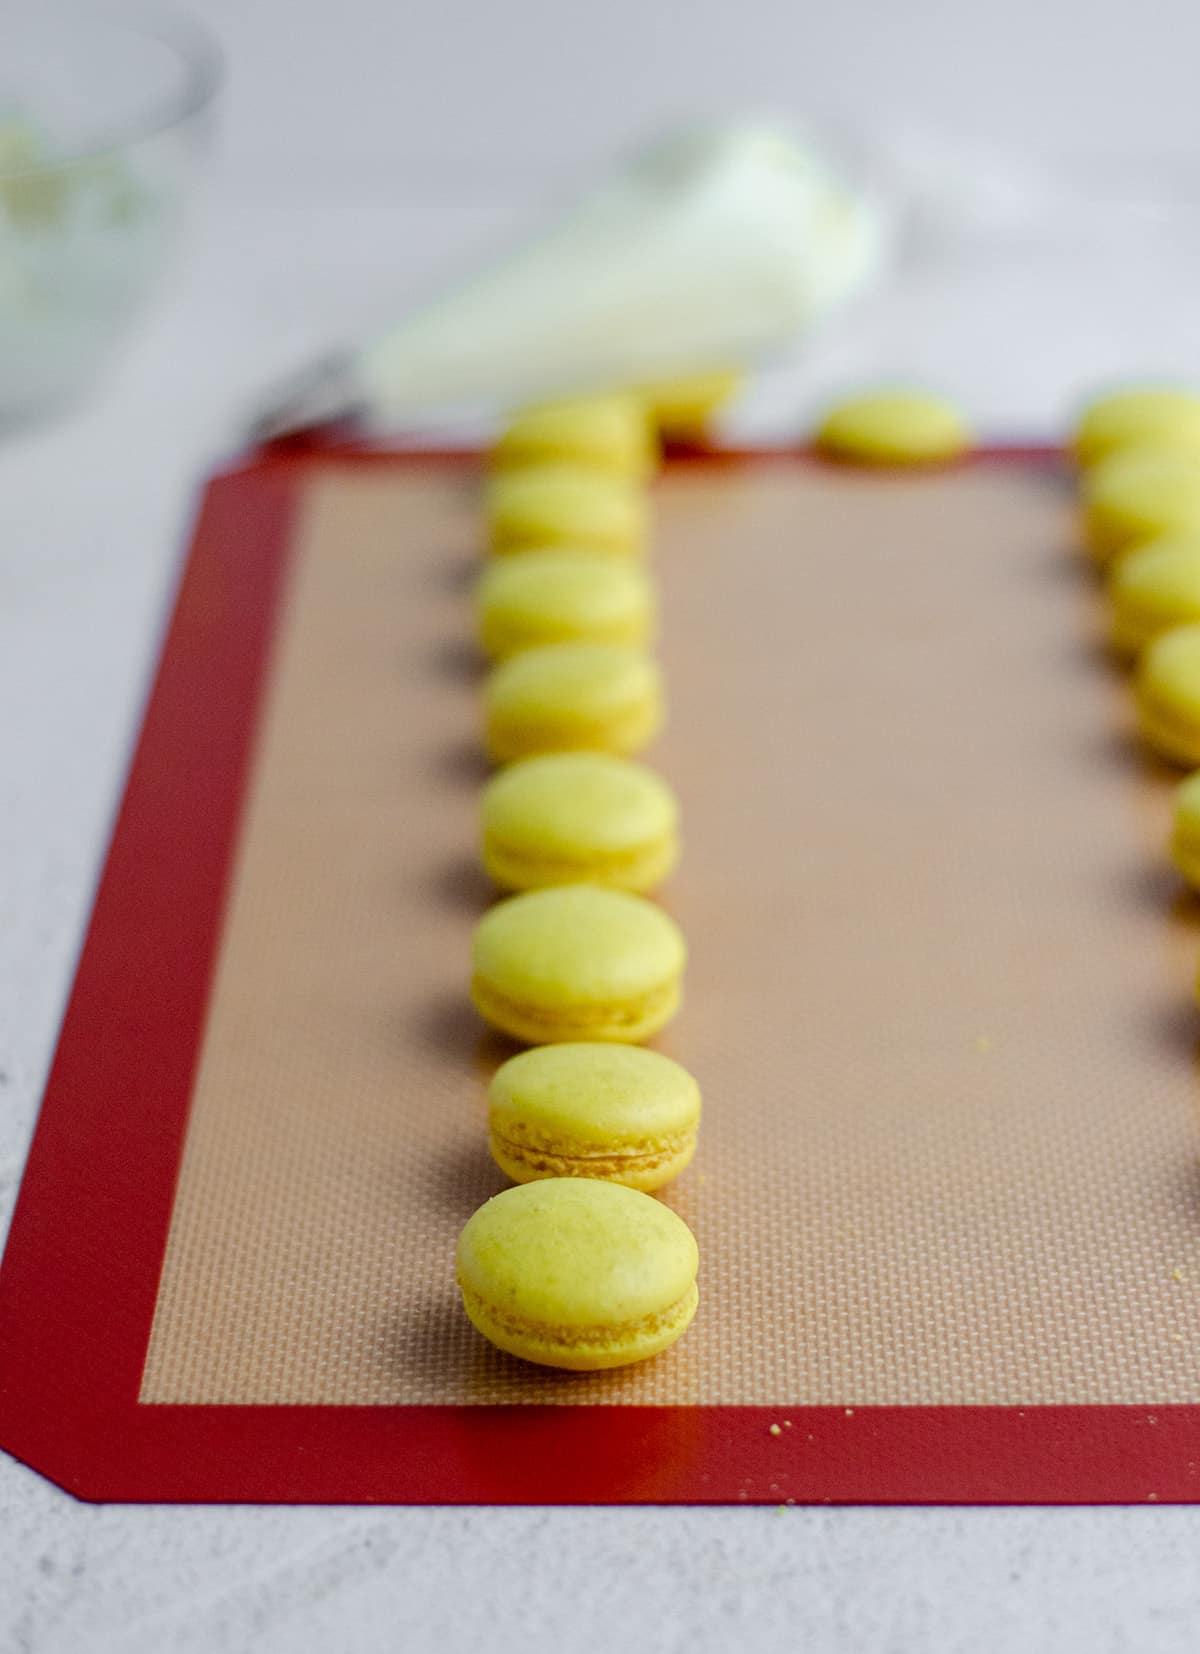 lemon macarons on a baking sheet getting ready to assemble with frosting on the inside